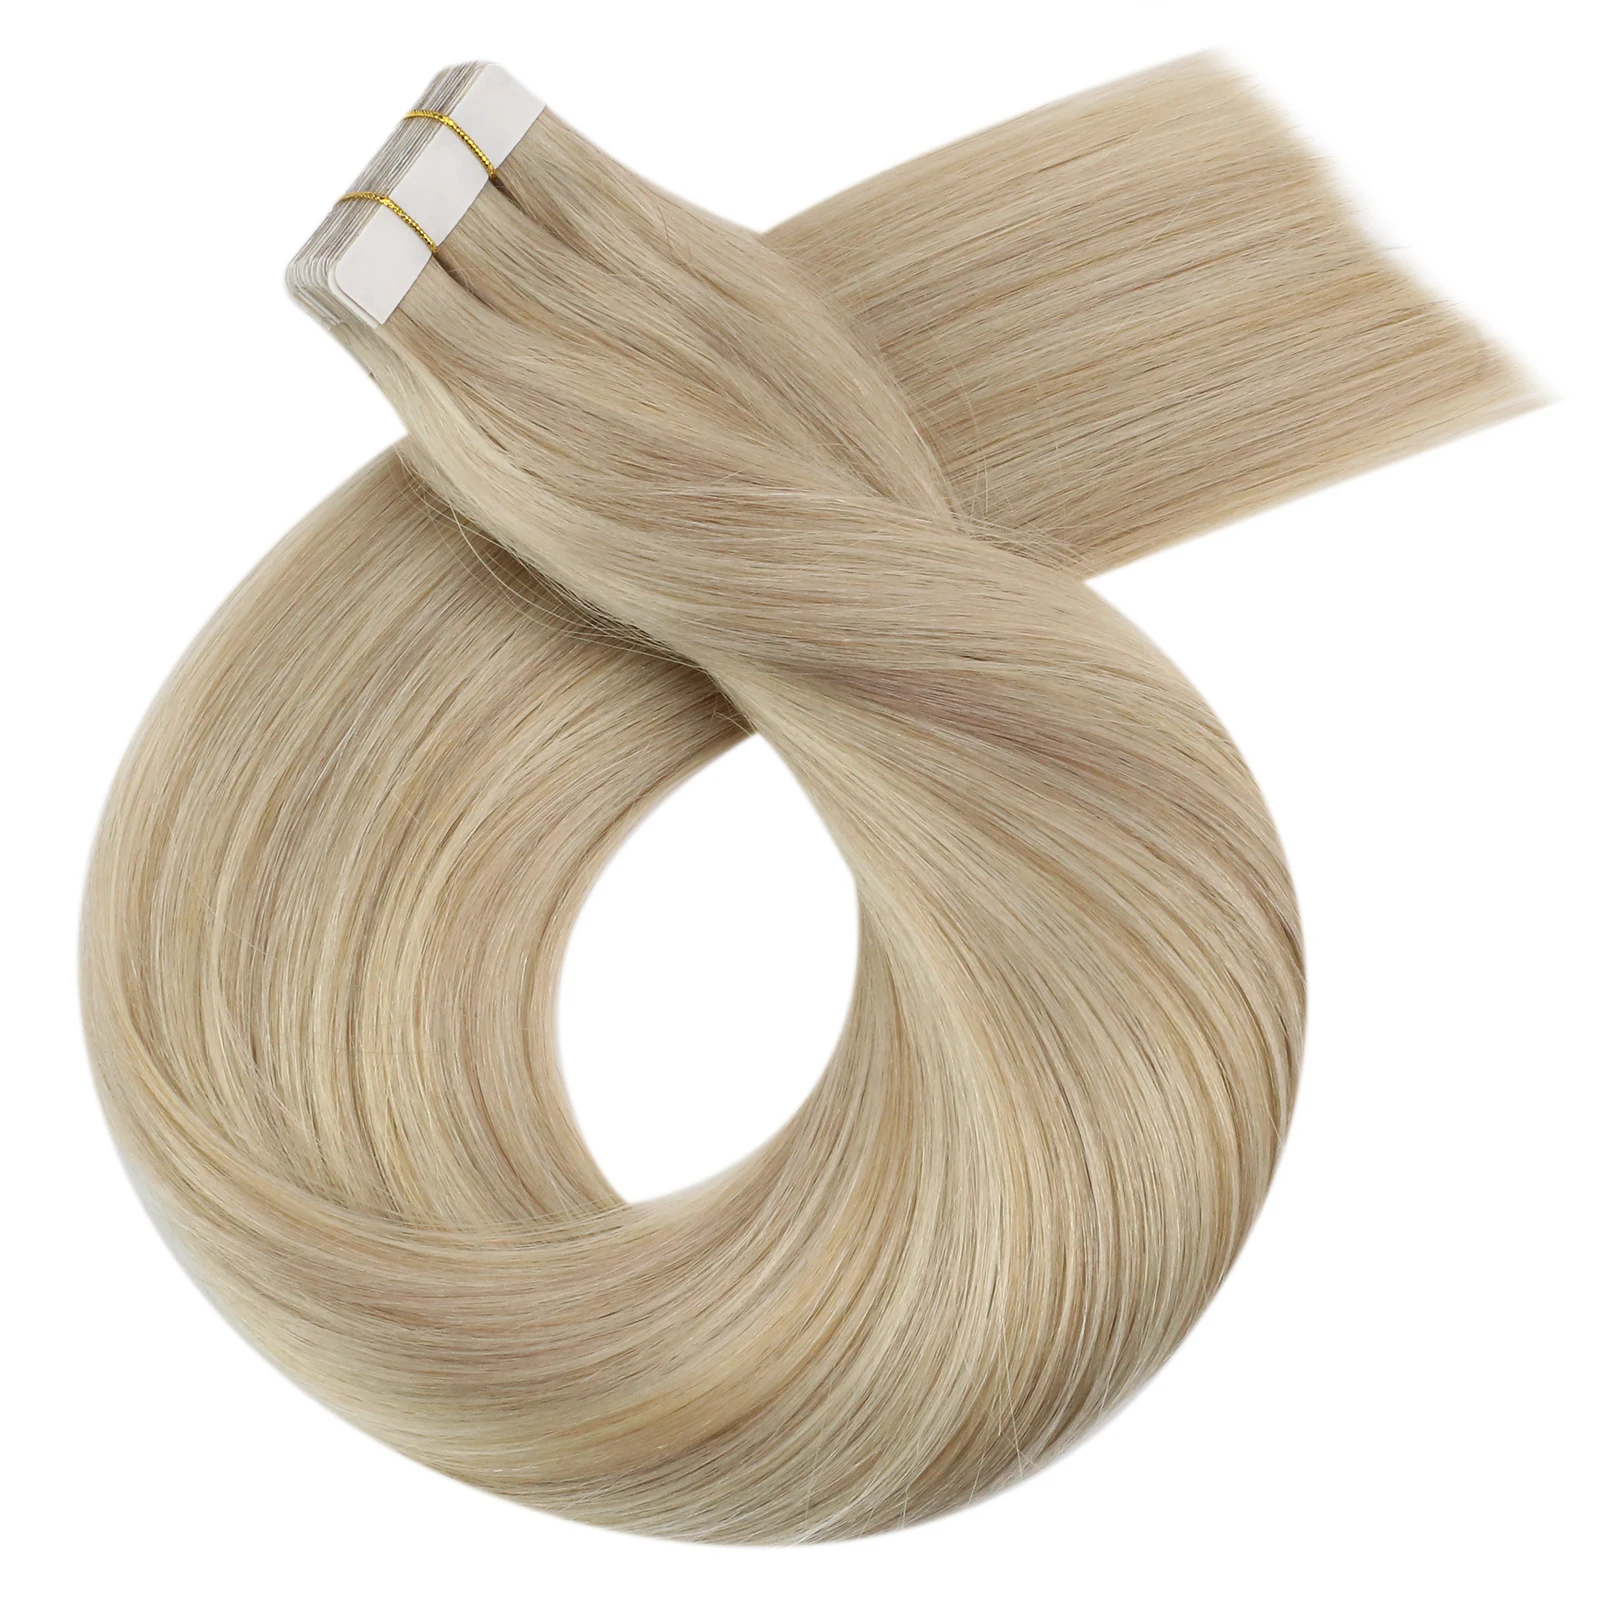 

Moresoo 24 inch tape in human hair extensions Silky Seamless Skin Weft Straight Remy Human Hair Extensions